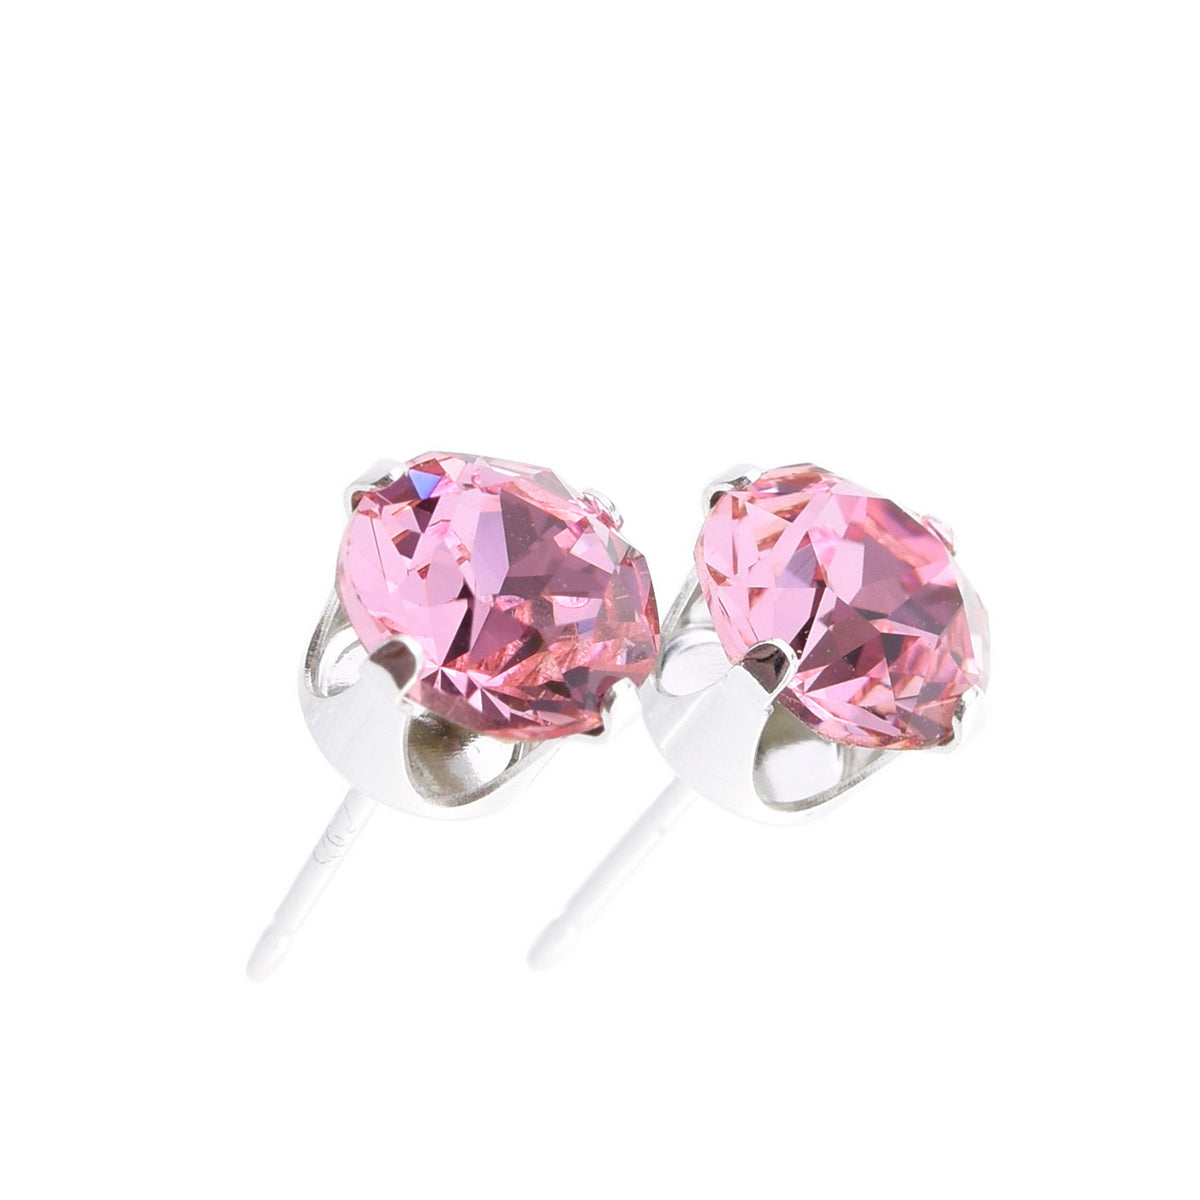 pewterhooter® Women's Classic Collection 925 Sterling silver earrings with sparkling Light Pink crystals, packaged in a gift box for any occasion.